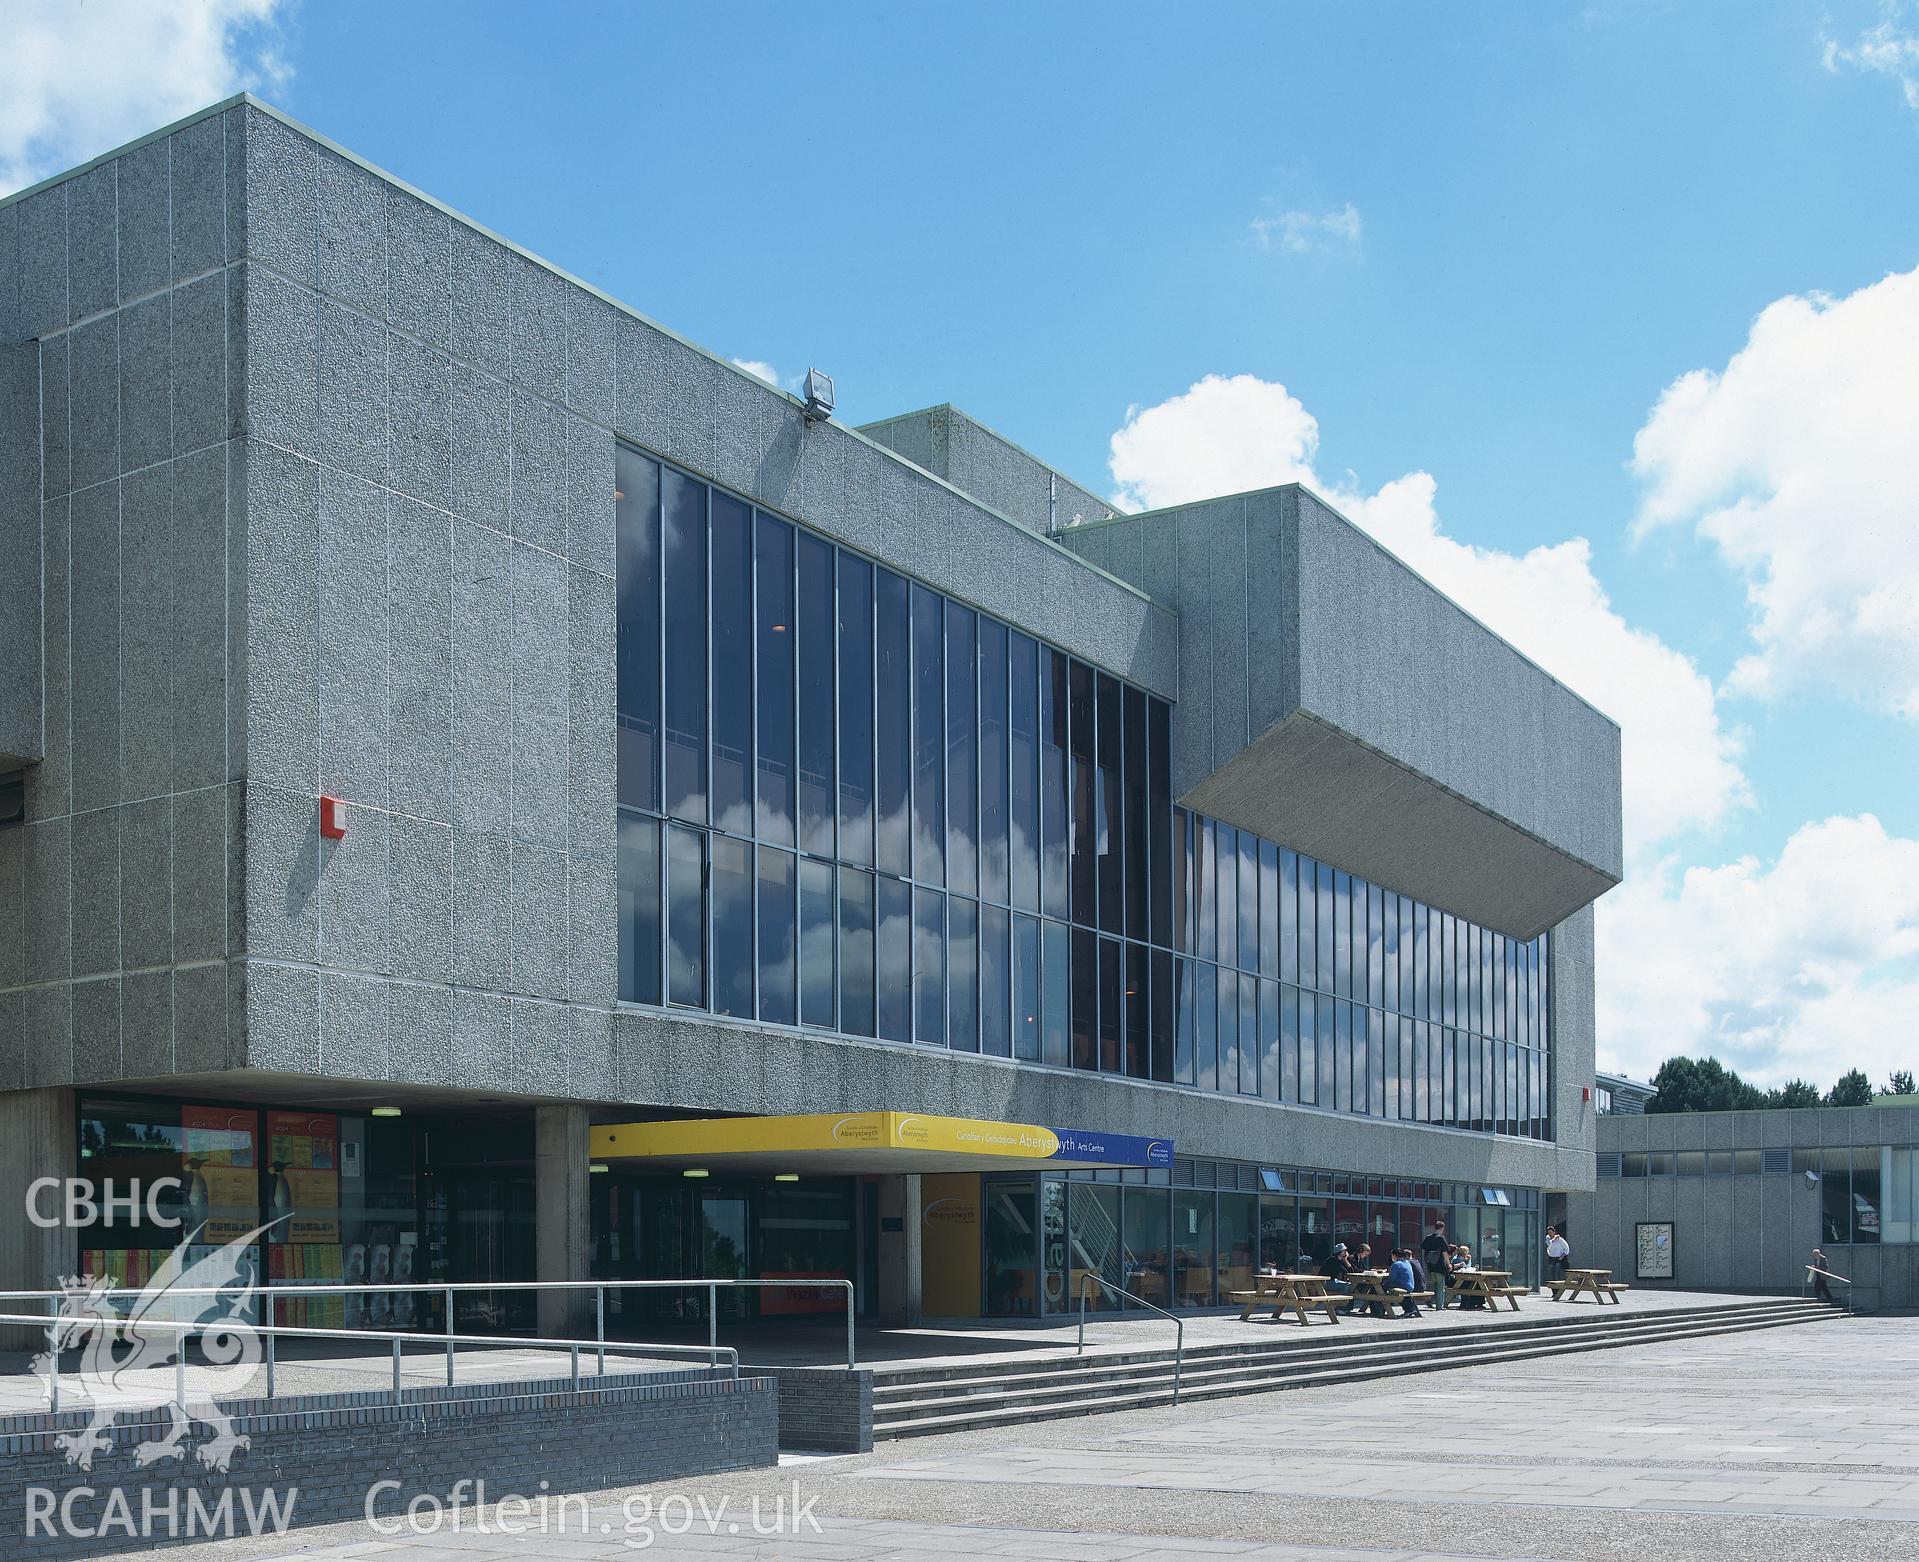 RCAHMW colour transparency showing view of Arts Centre, Aberystwyth